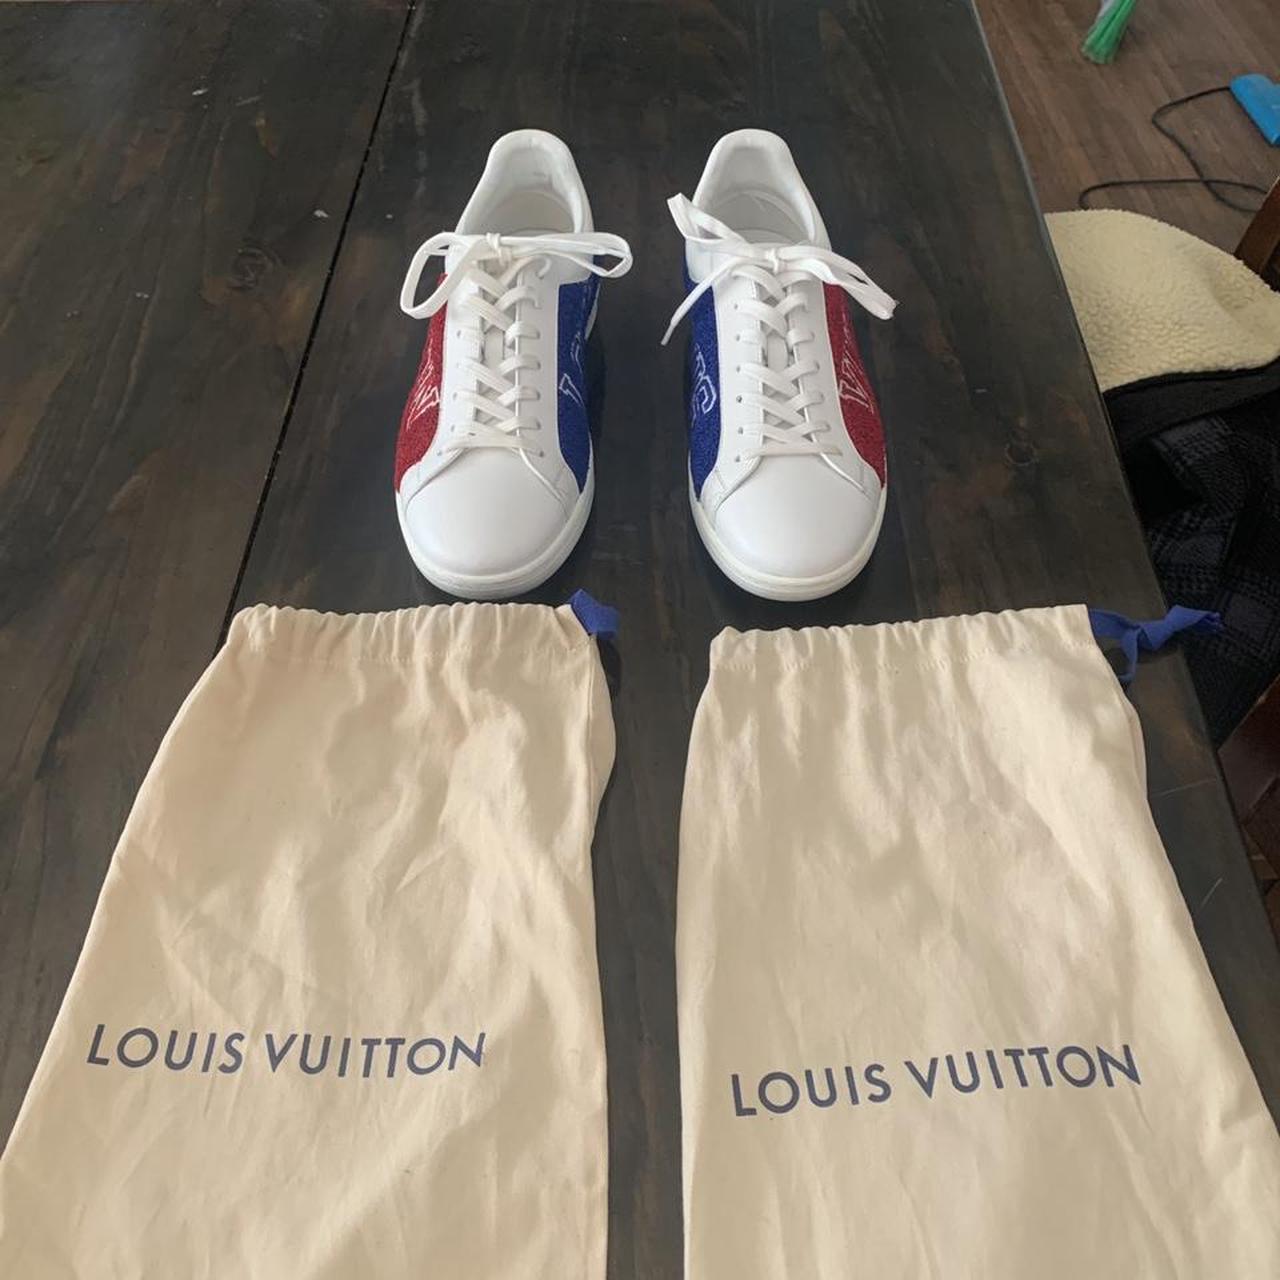 Louis Vuitton White Blue/Red Terry Fabric Luxembourg Sneakers Size